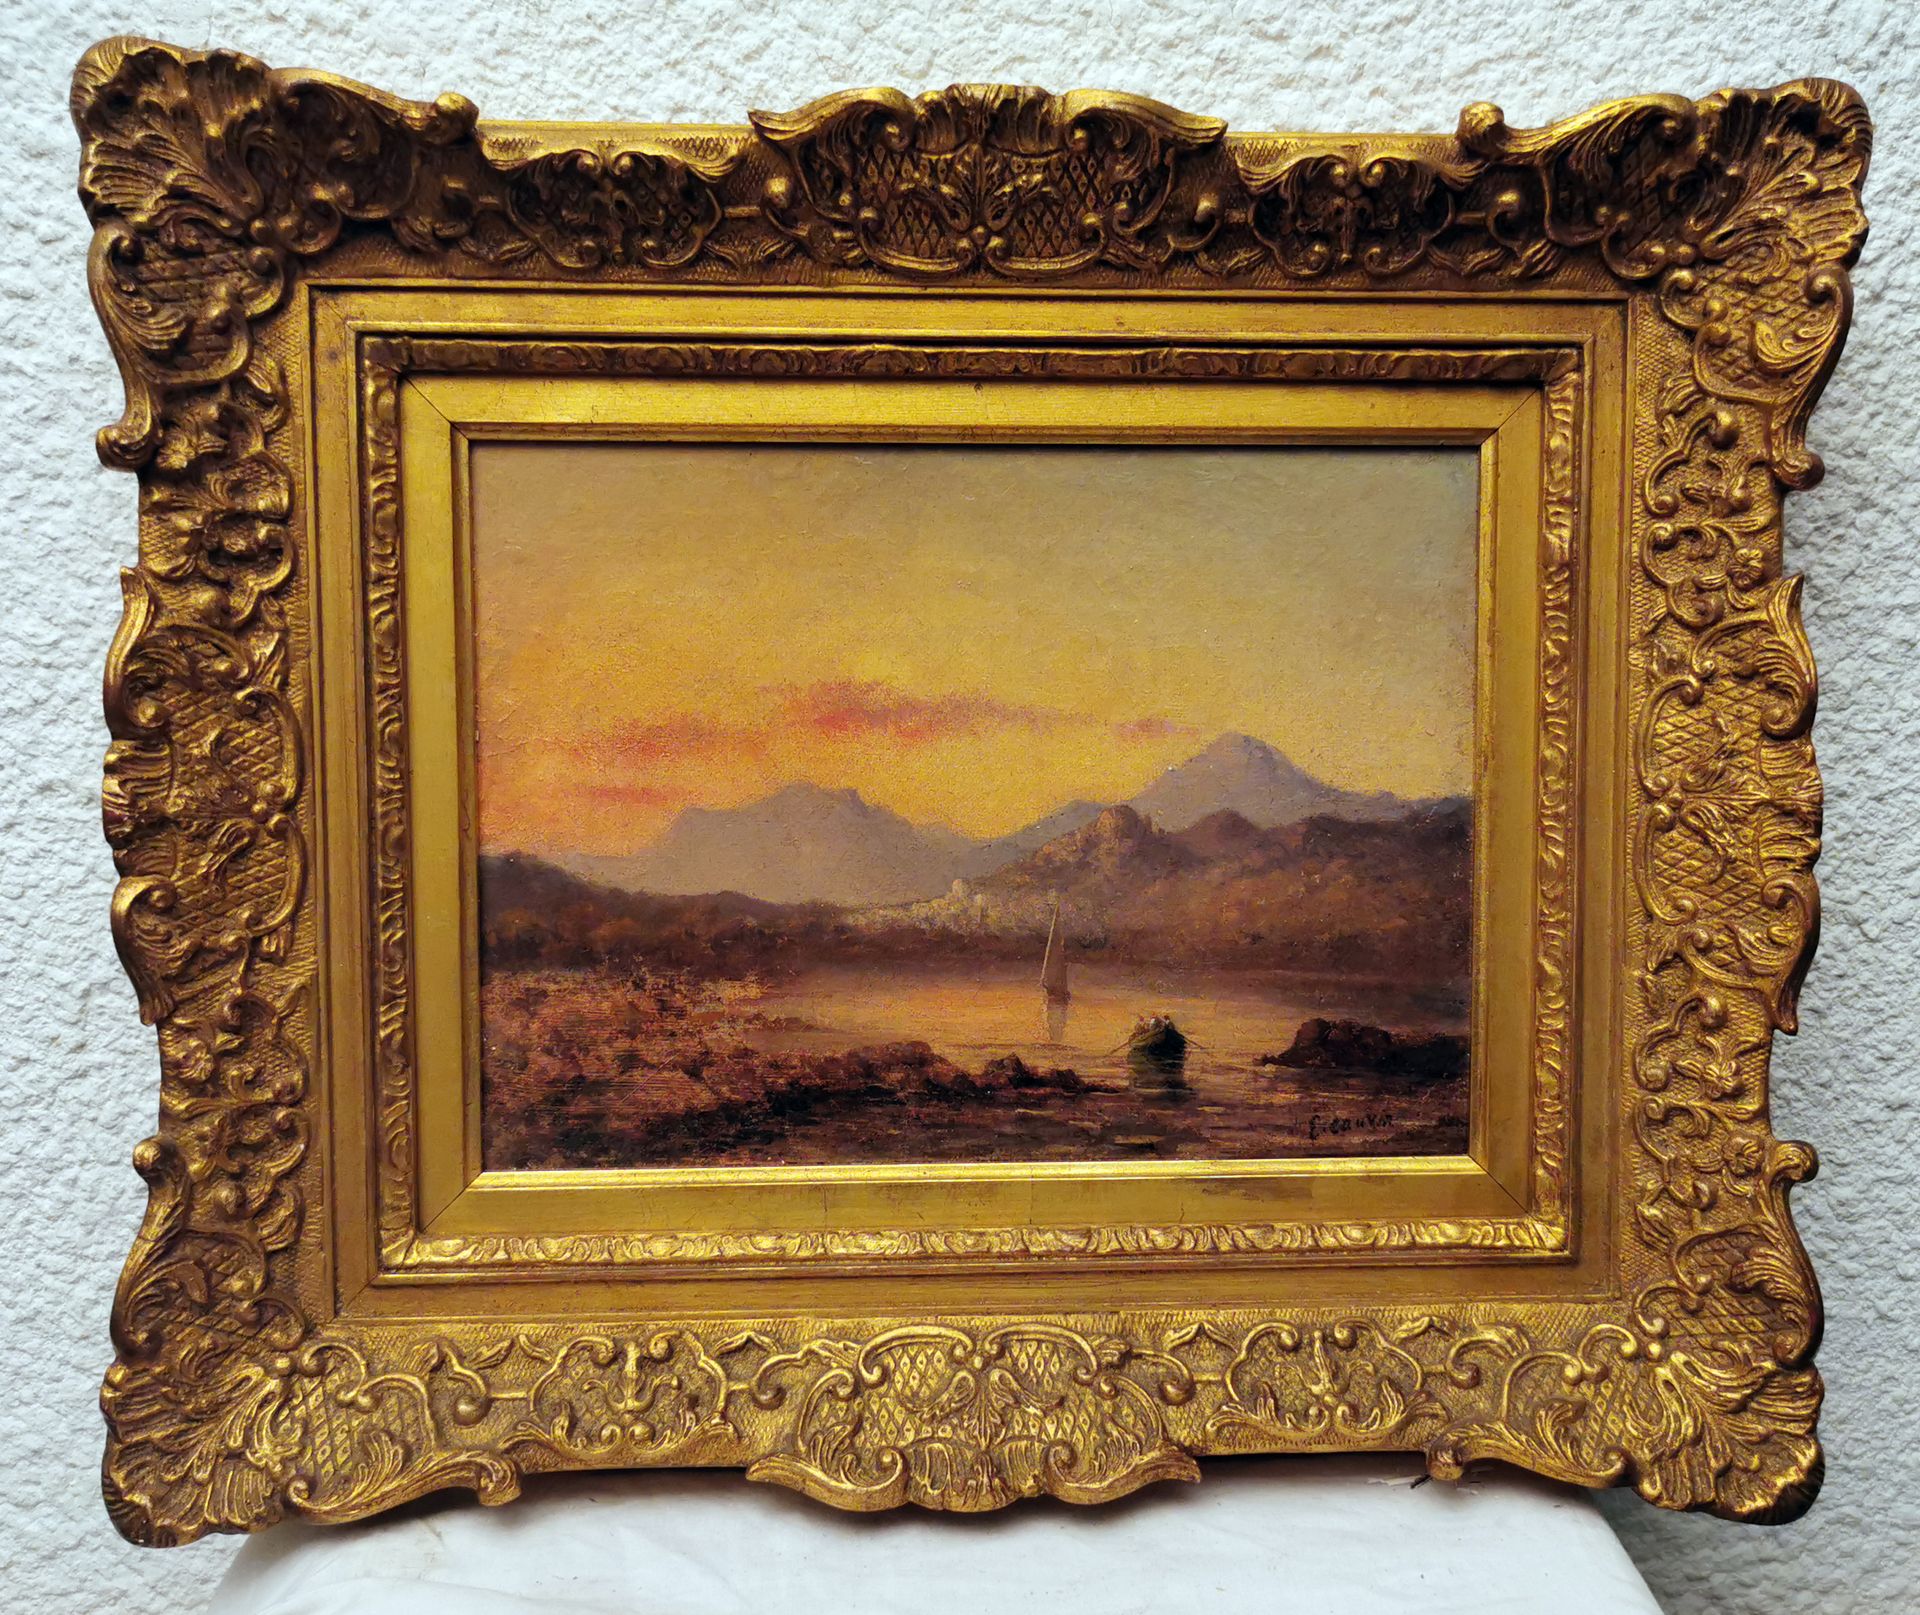 Edouard Louis Cauvin EDOUARD LOUIS CAUVIN (1817-1900) "ANIMATED SUNSET ON THE CO&hellip;